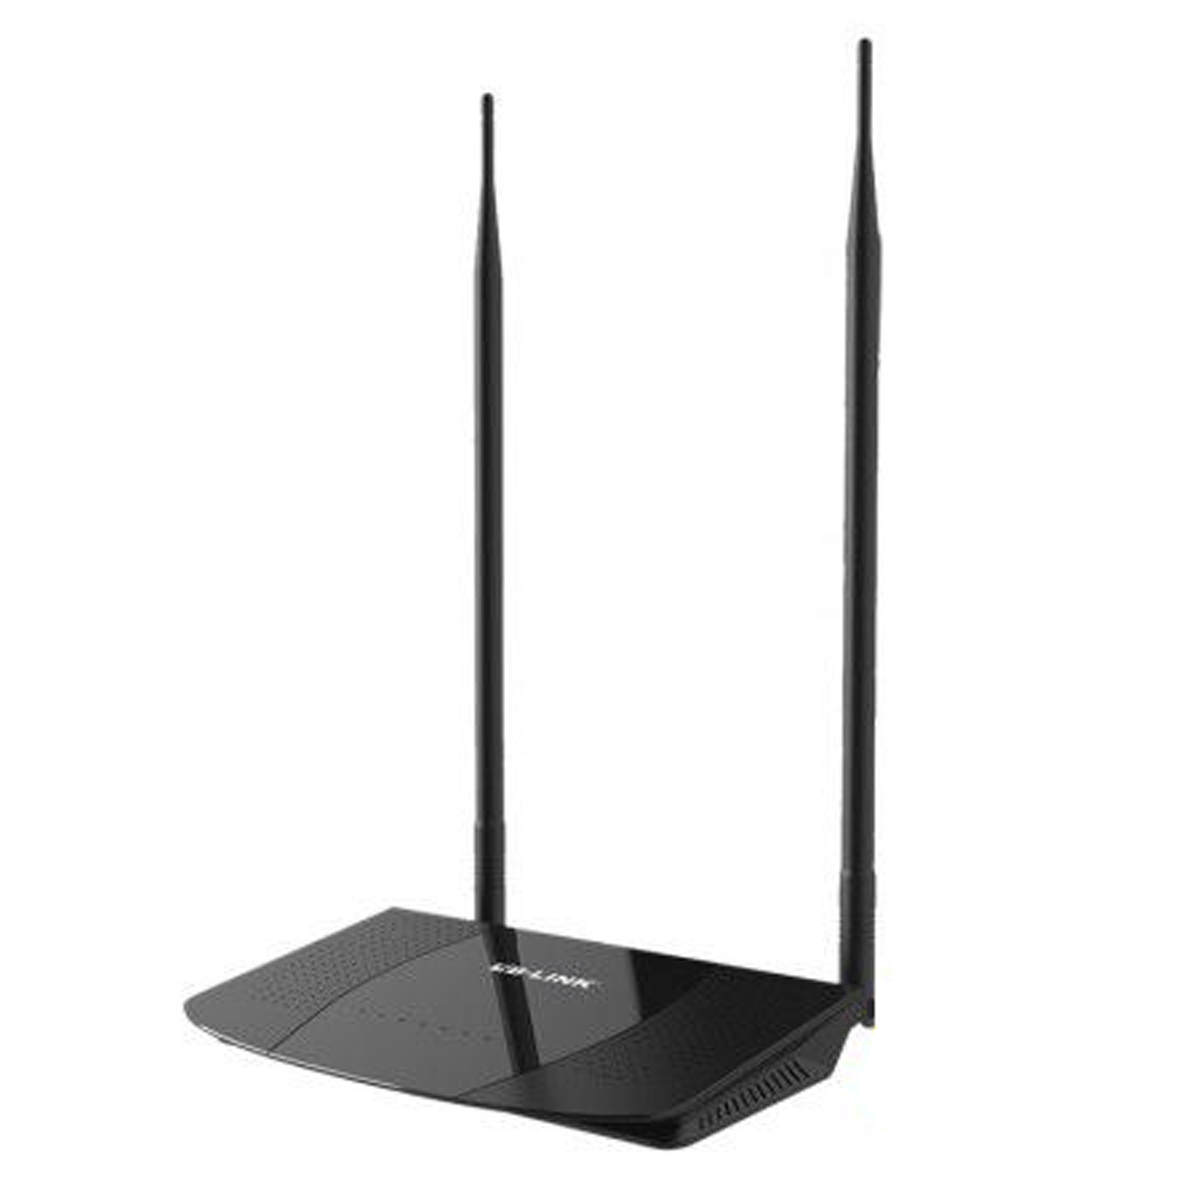 LB-Link BL-WR322H 300Mbps Wireless Router with two 9 dbi Antennas